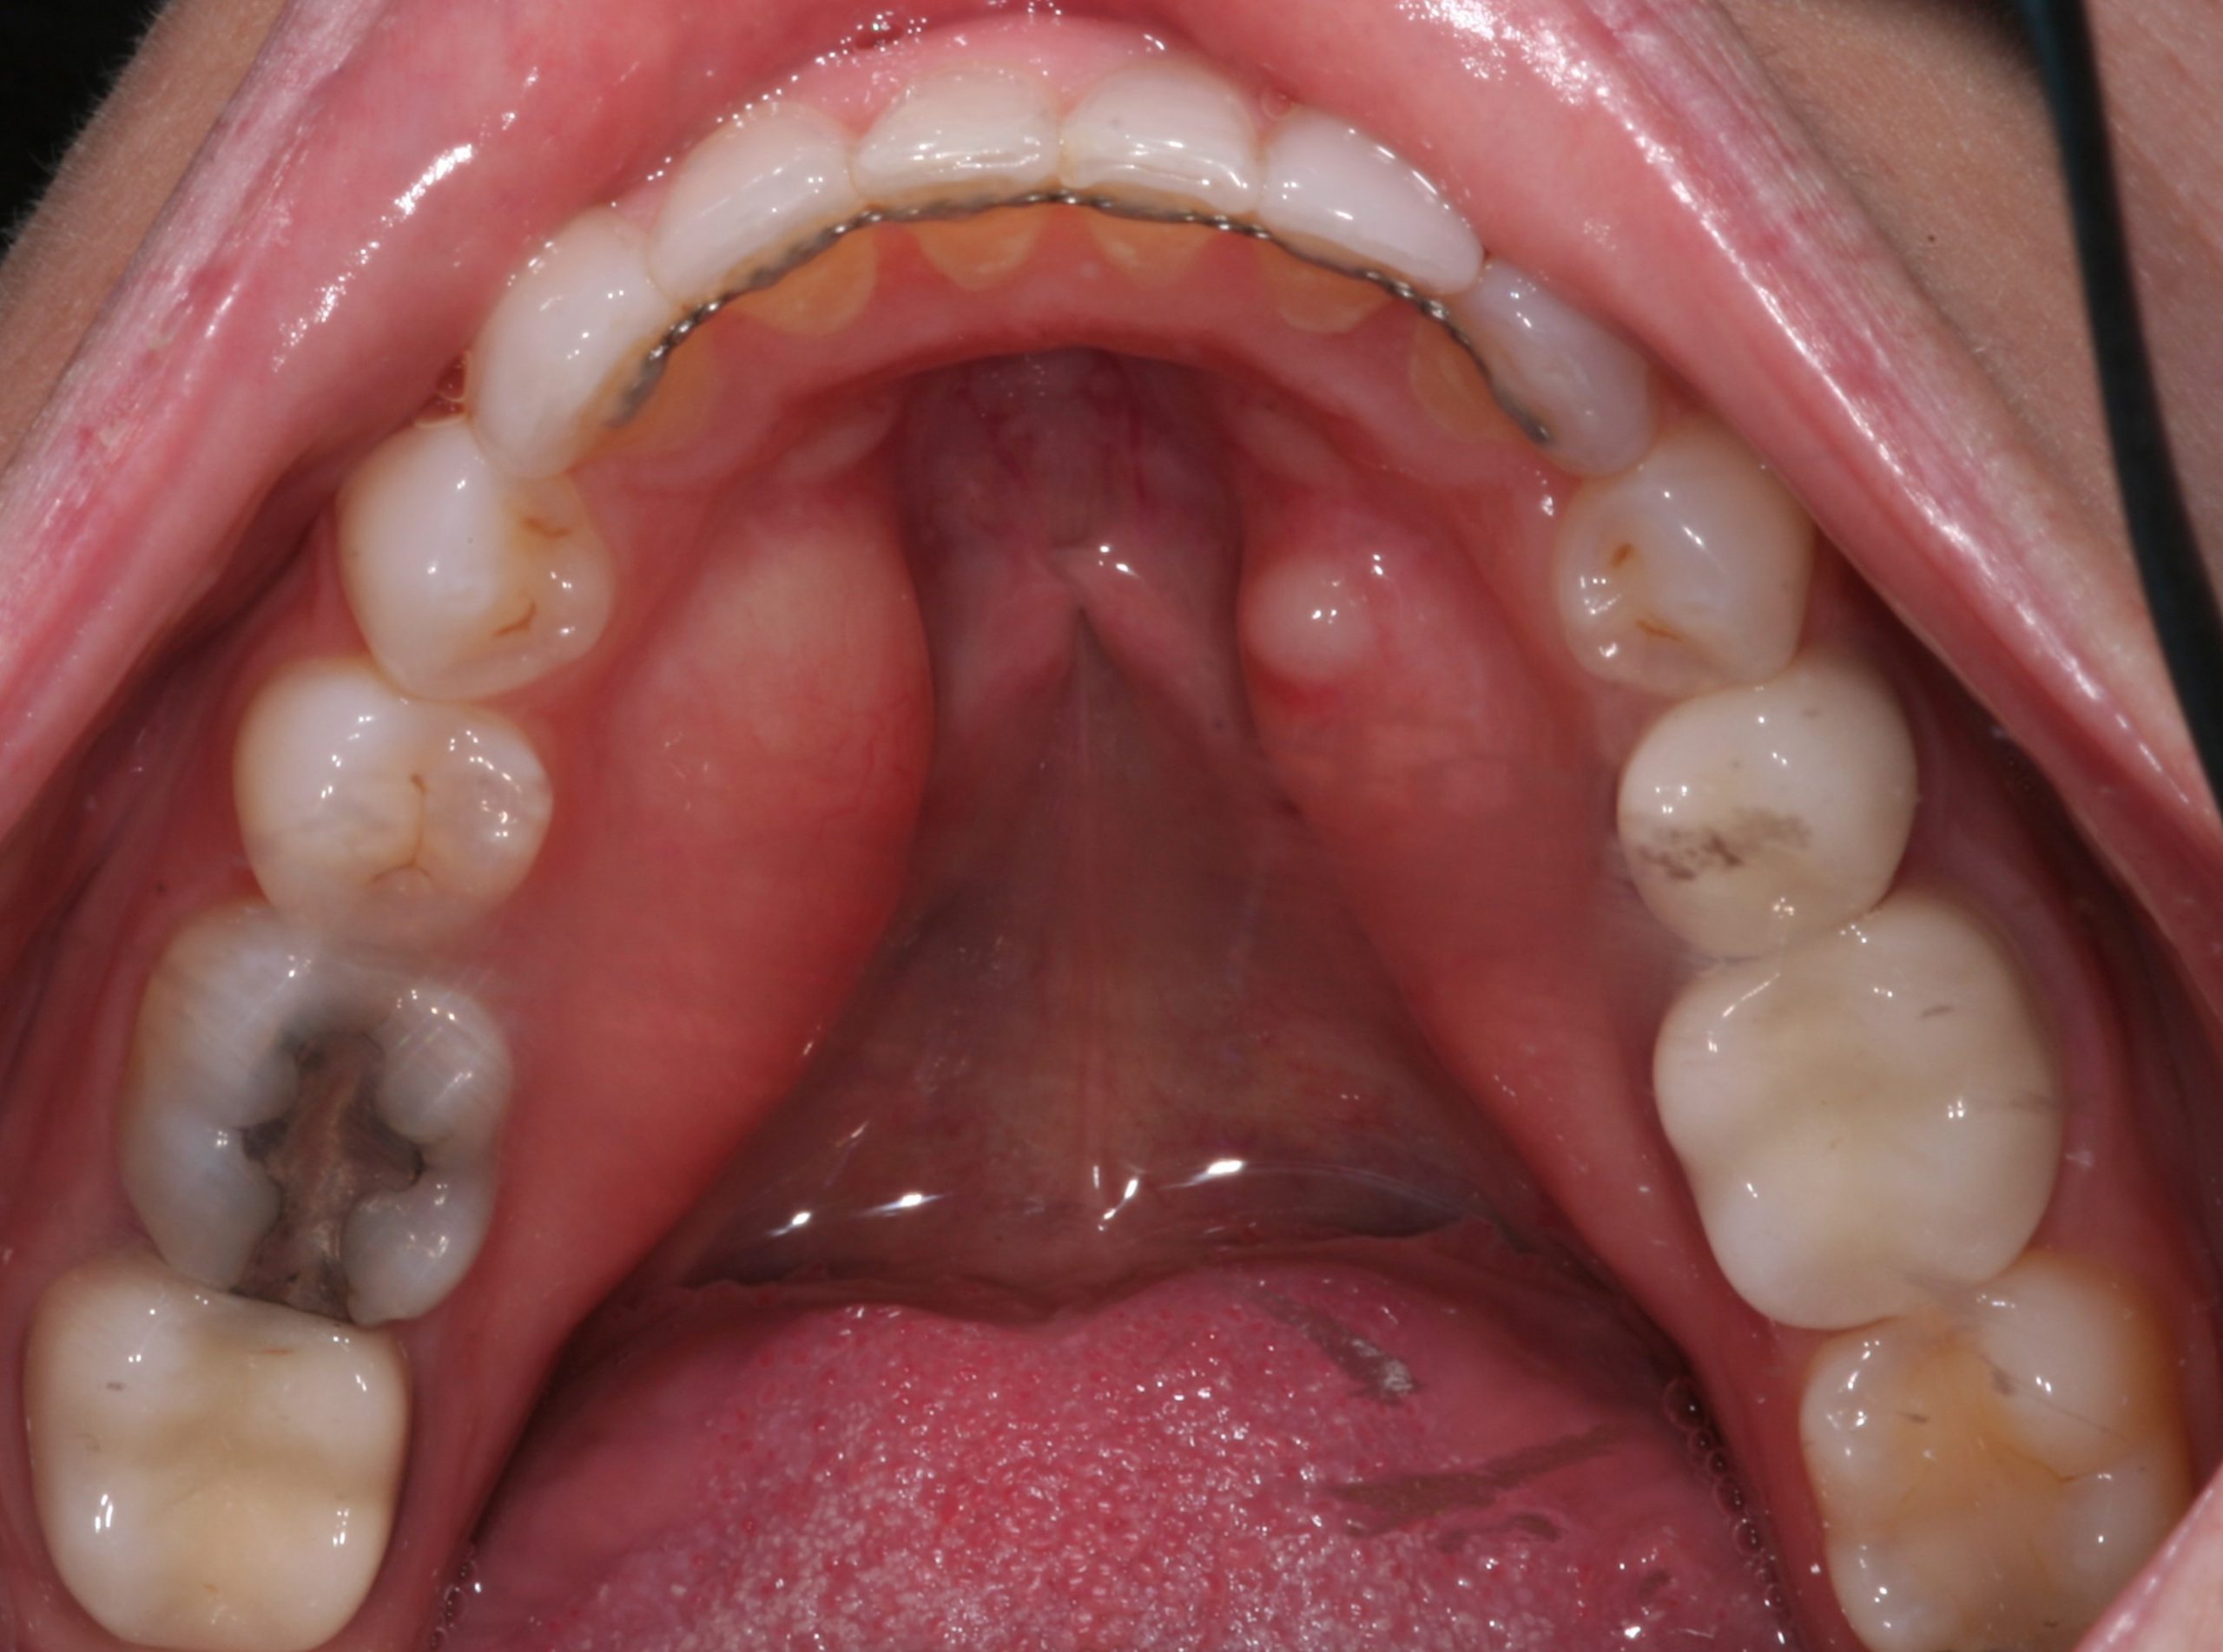 Patient's straight bottom row teeth without cavities after dental work.